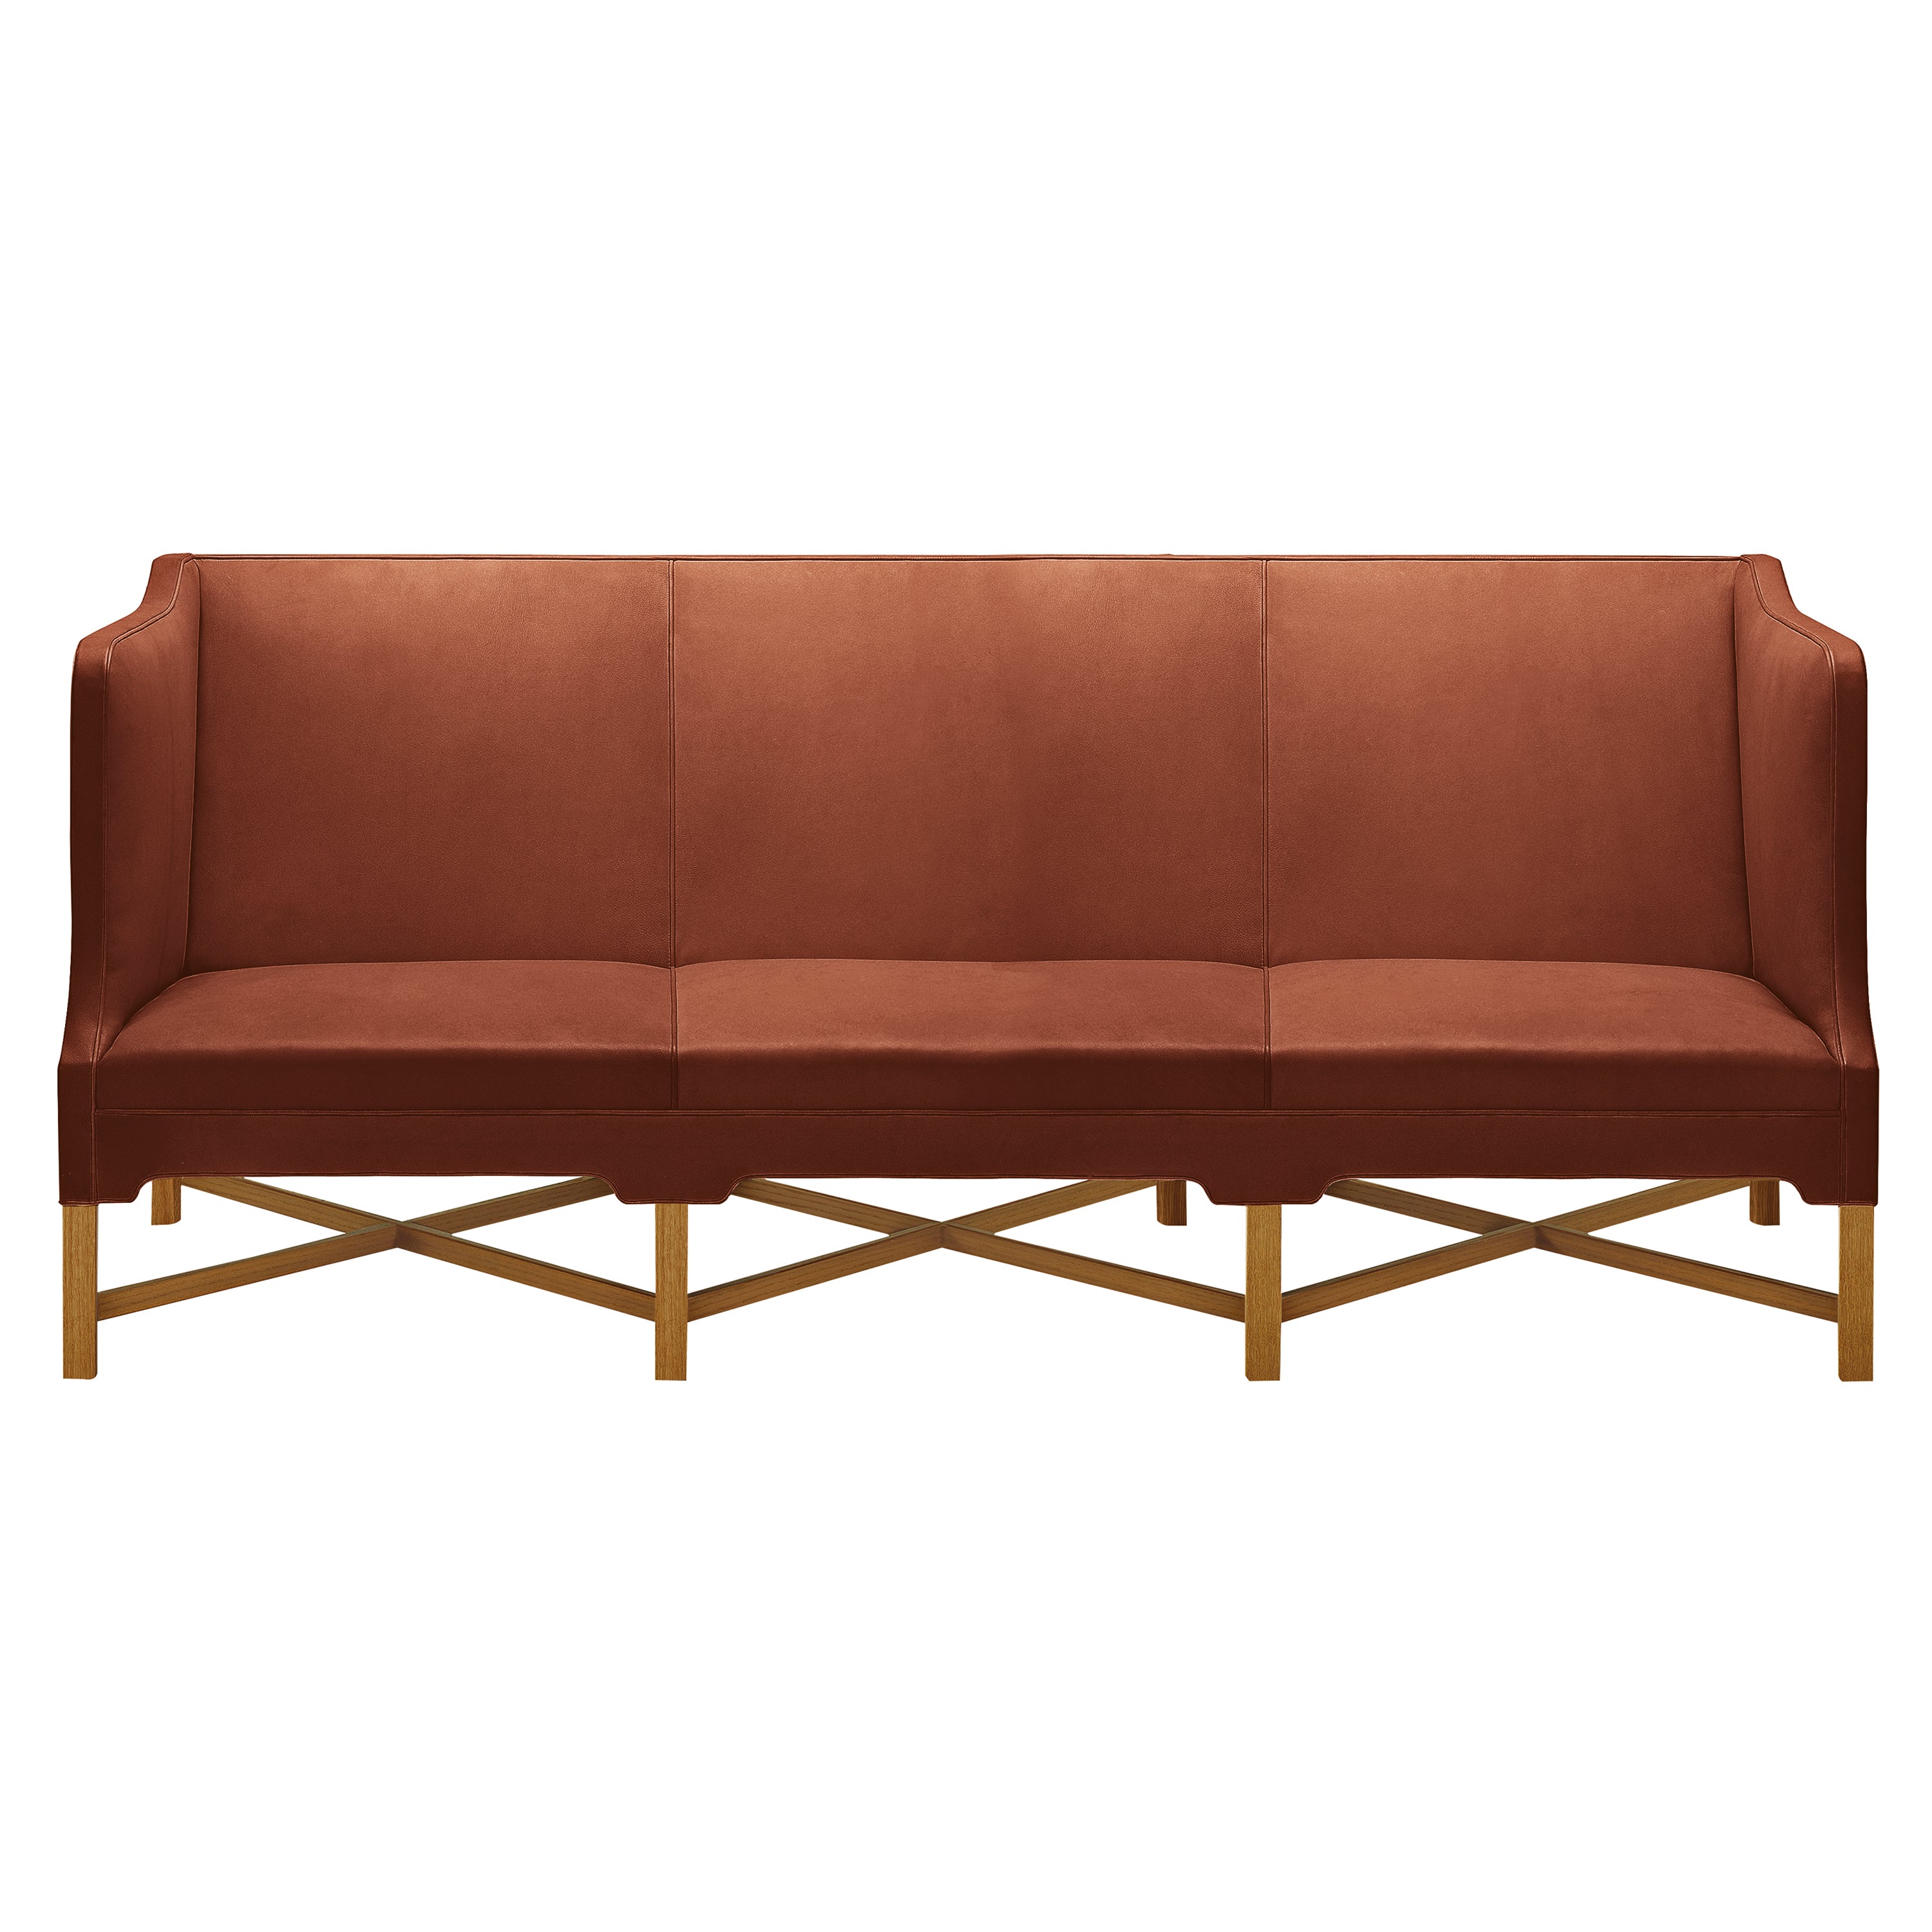 Sofa with High Sides: 3 Seater + Oiled Oak